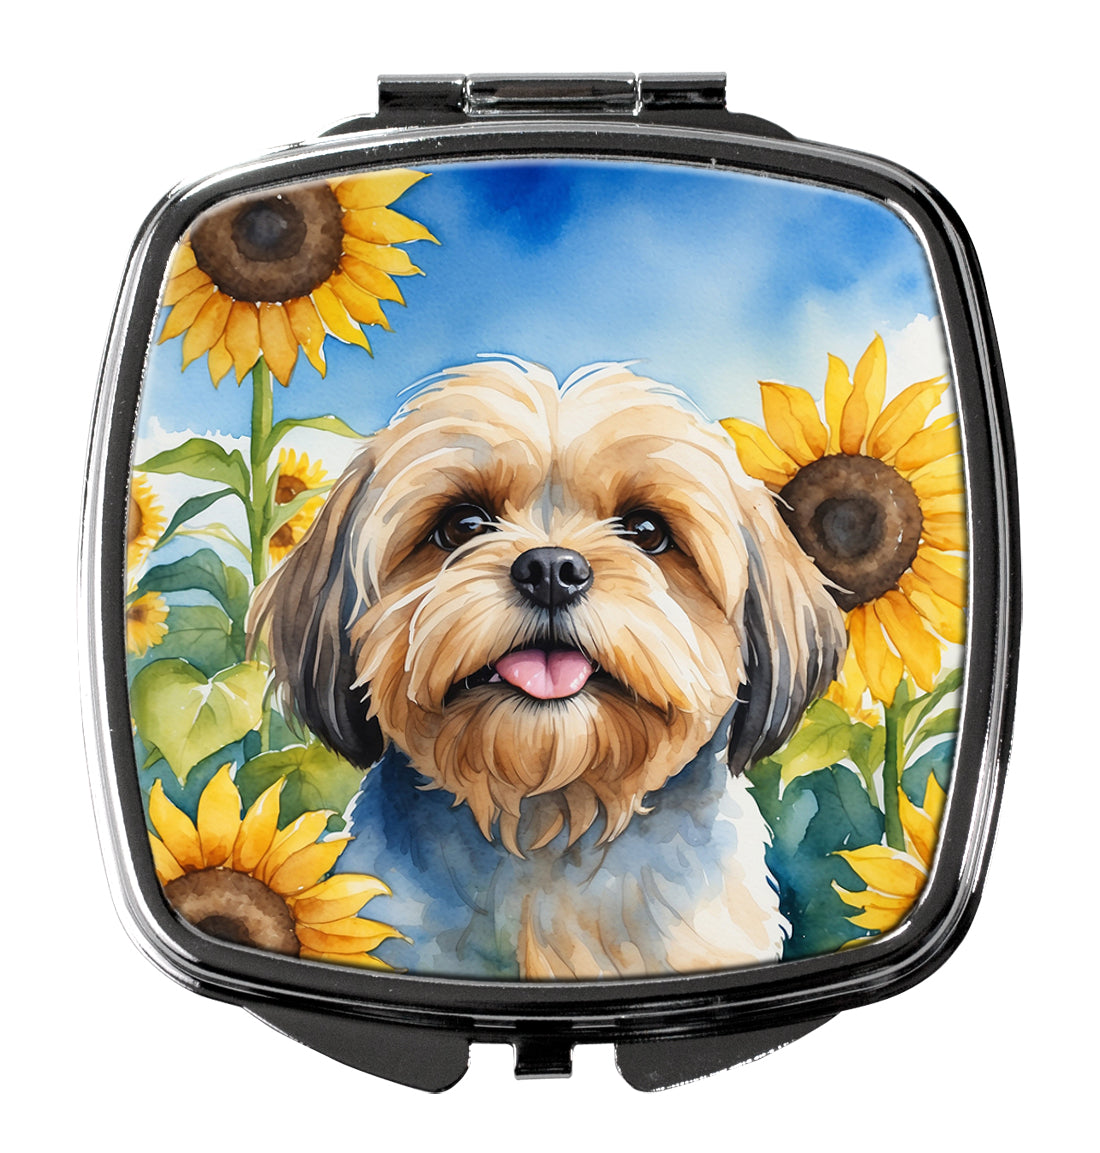 Buy this Lhasa Apso in Sunflowers Compact Mirror